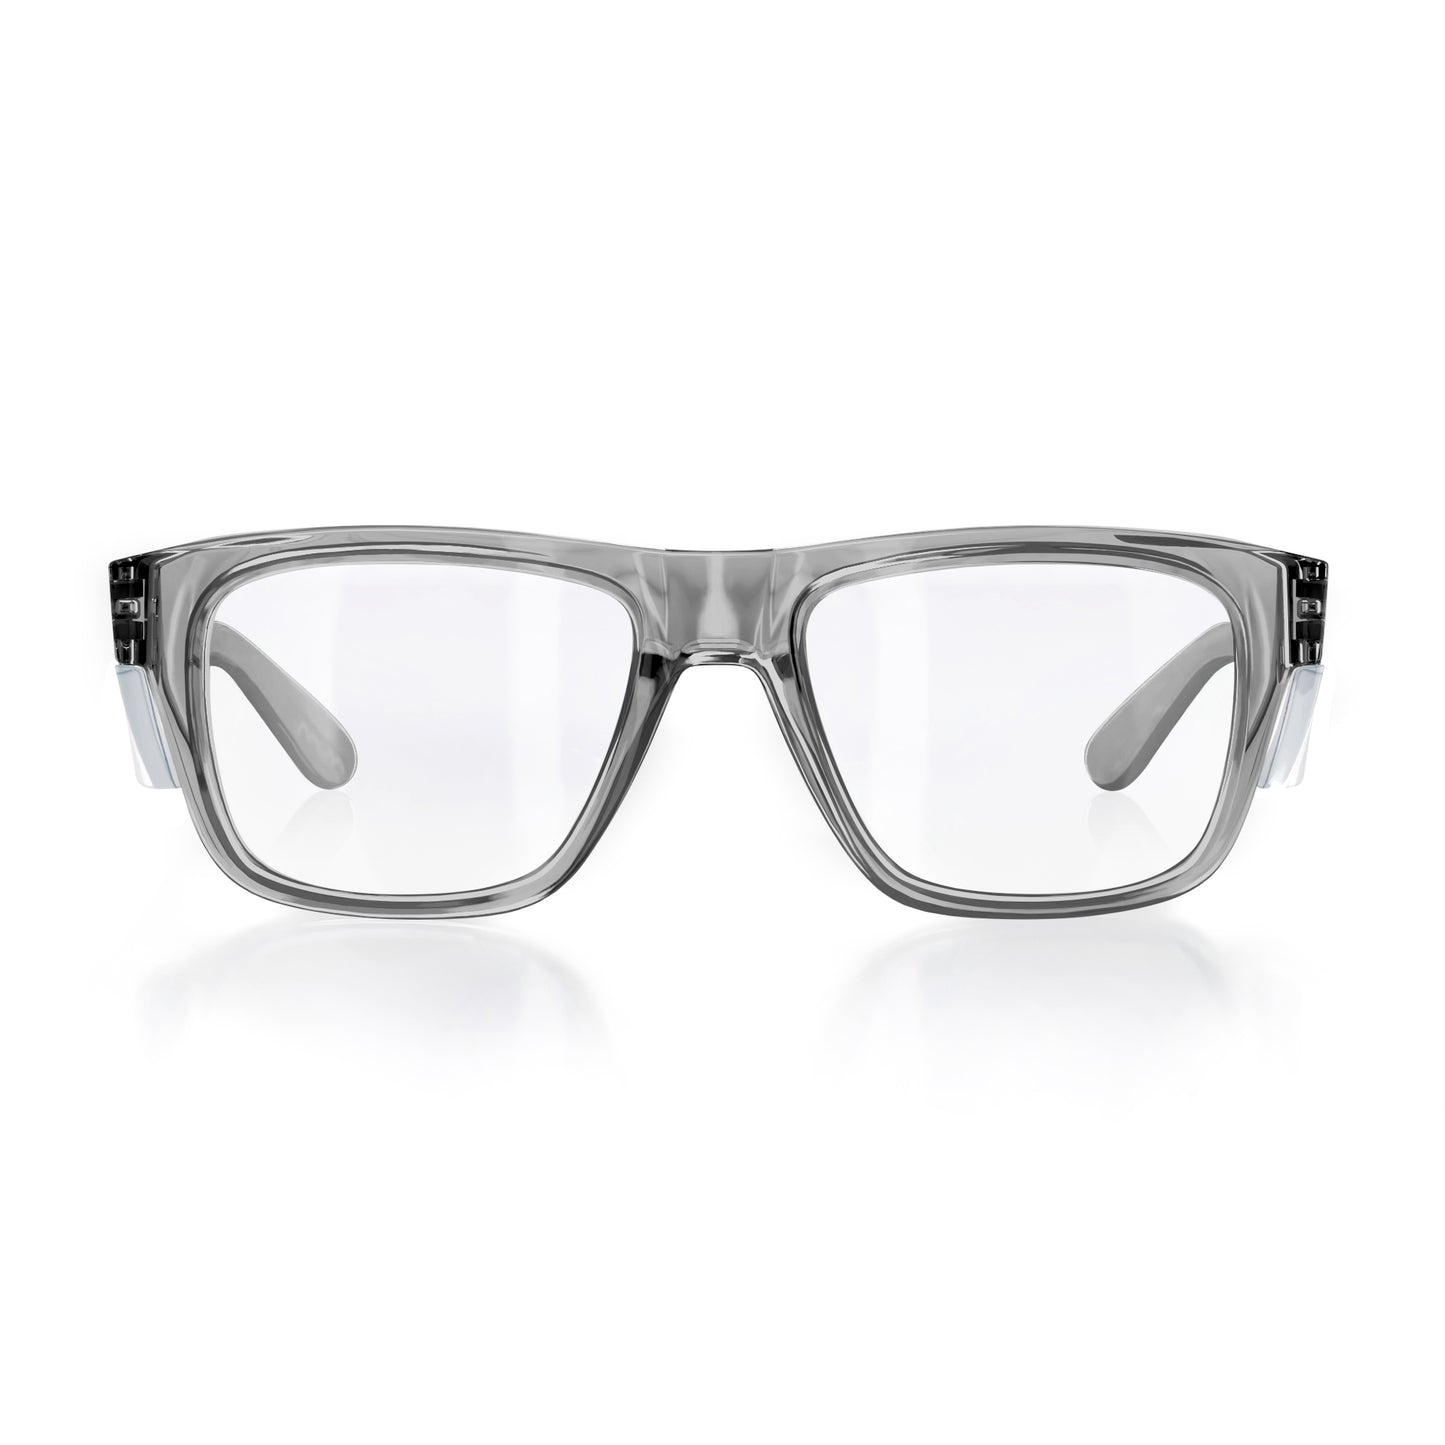 SafeStyle Fusions Graphite Frame/ Clear UV400